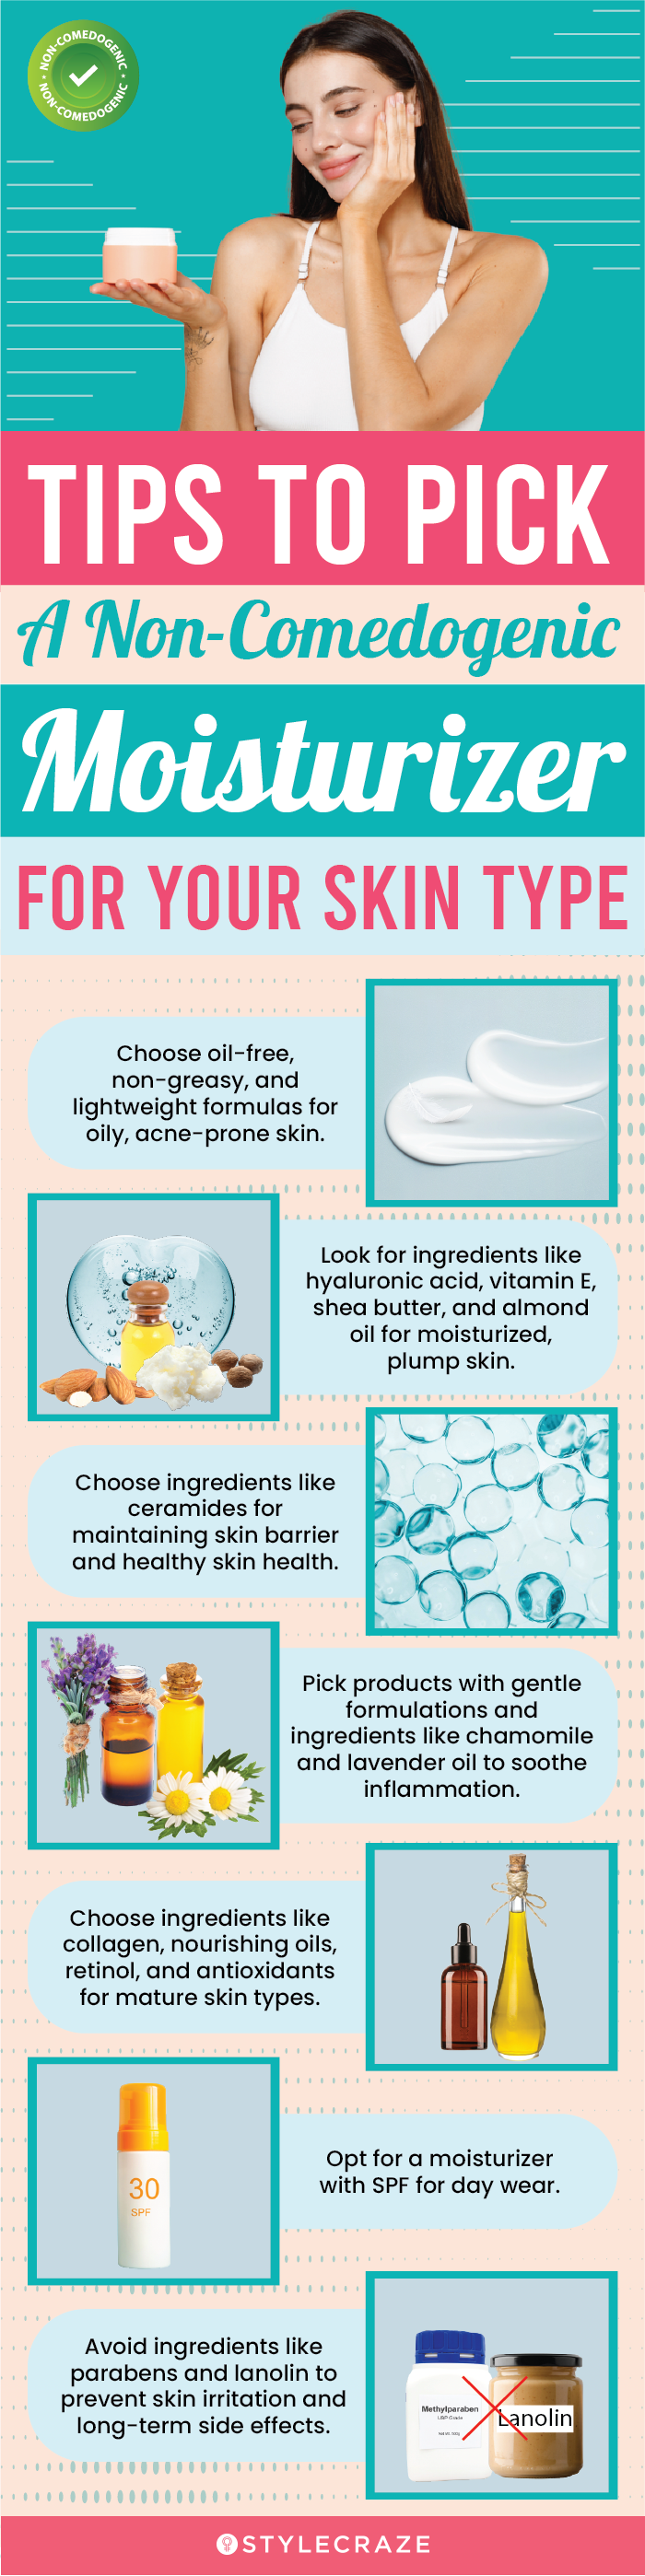 Tips To Pick A Non-Comedogenic Moisturizer For Your Skin Type (infographic)